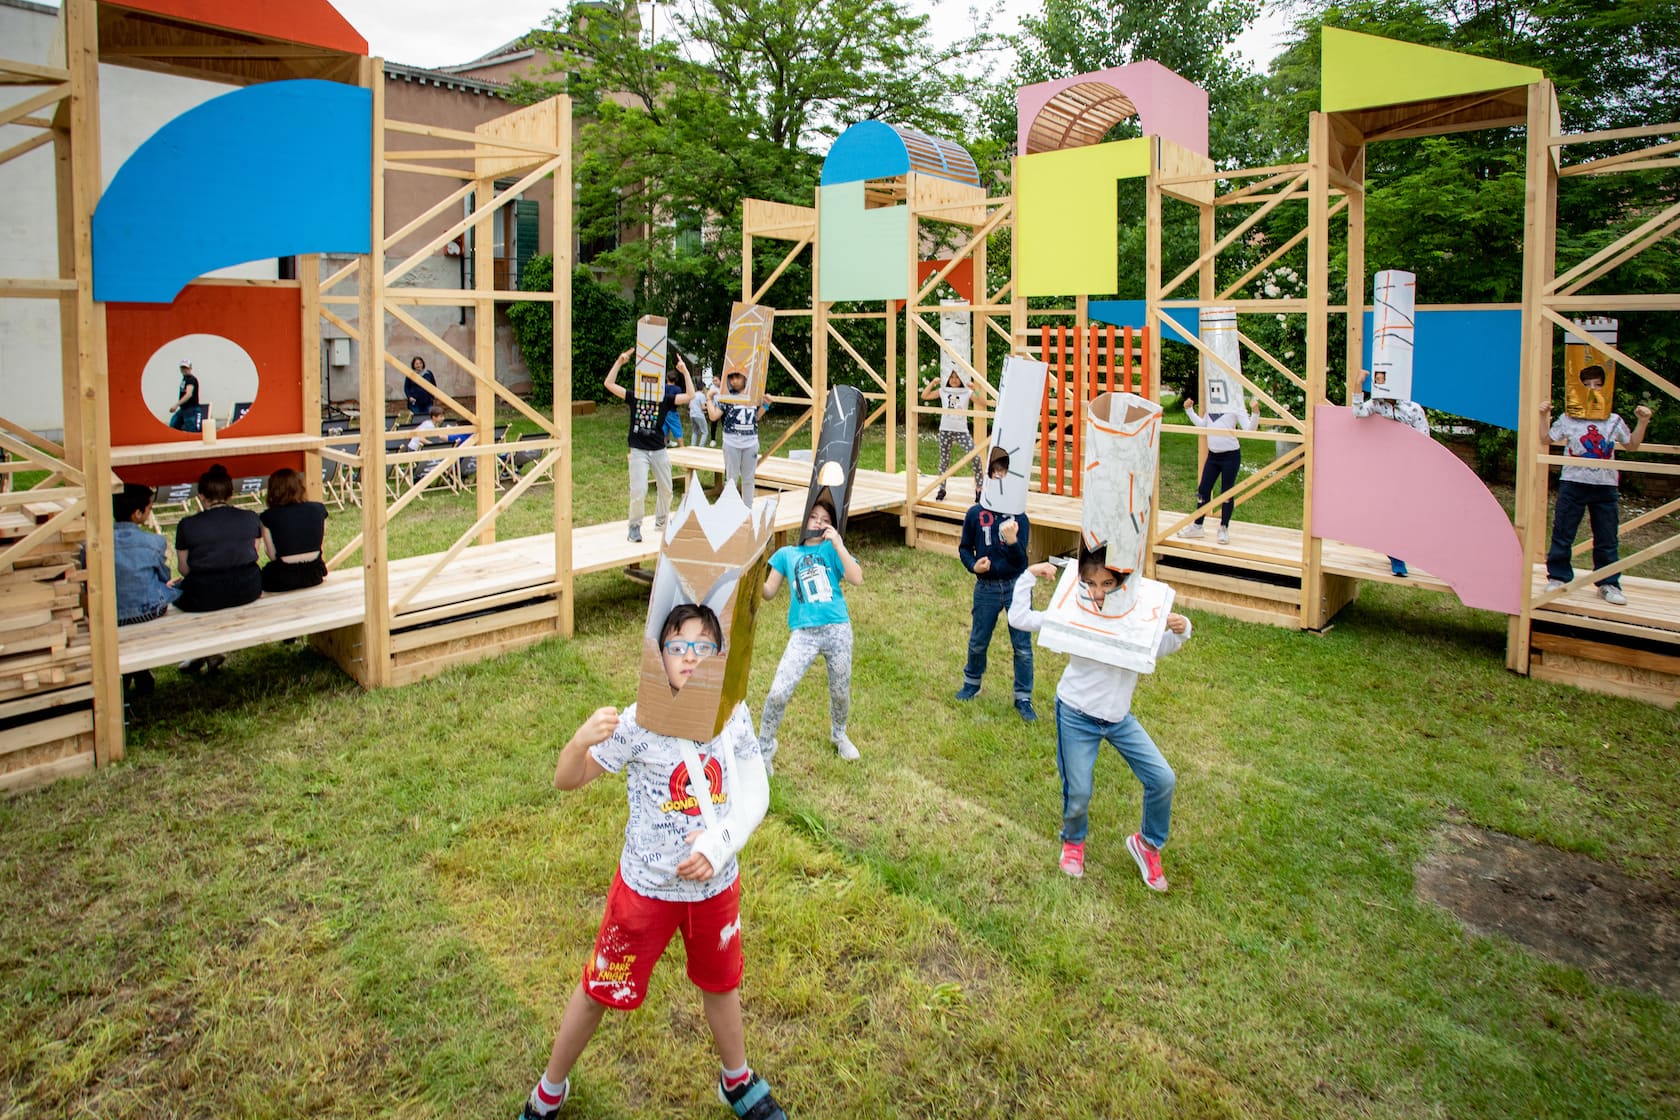 10 children are parading decorated, cardboard tower structures on their heads in The Happenstance’s garden venue.